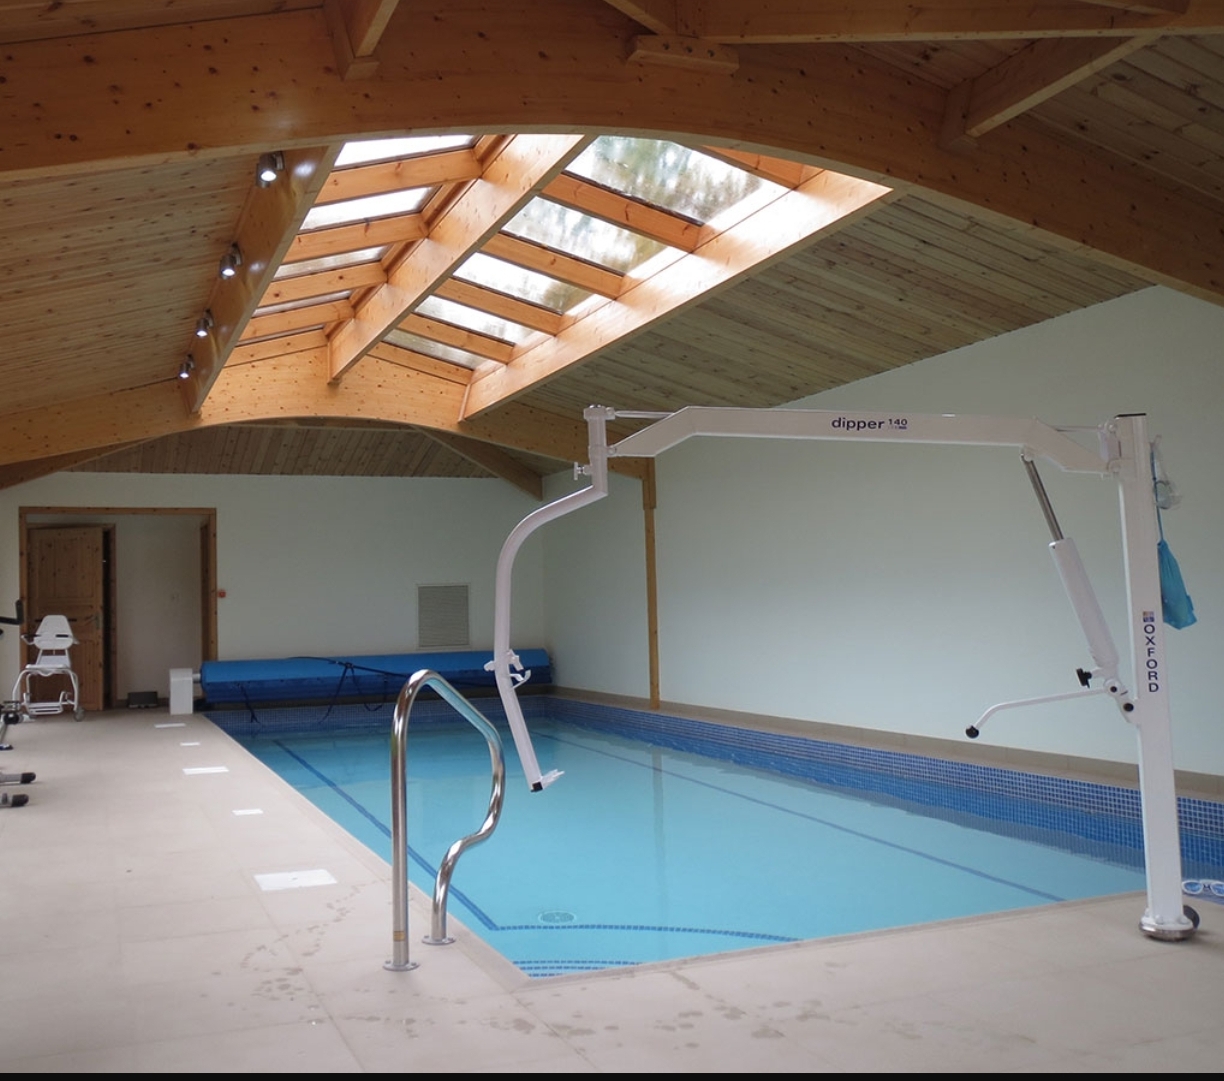 Finding your nearest Hydrotherapy Pool